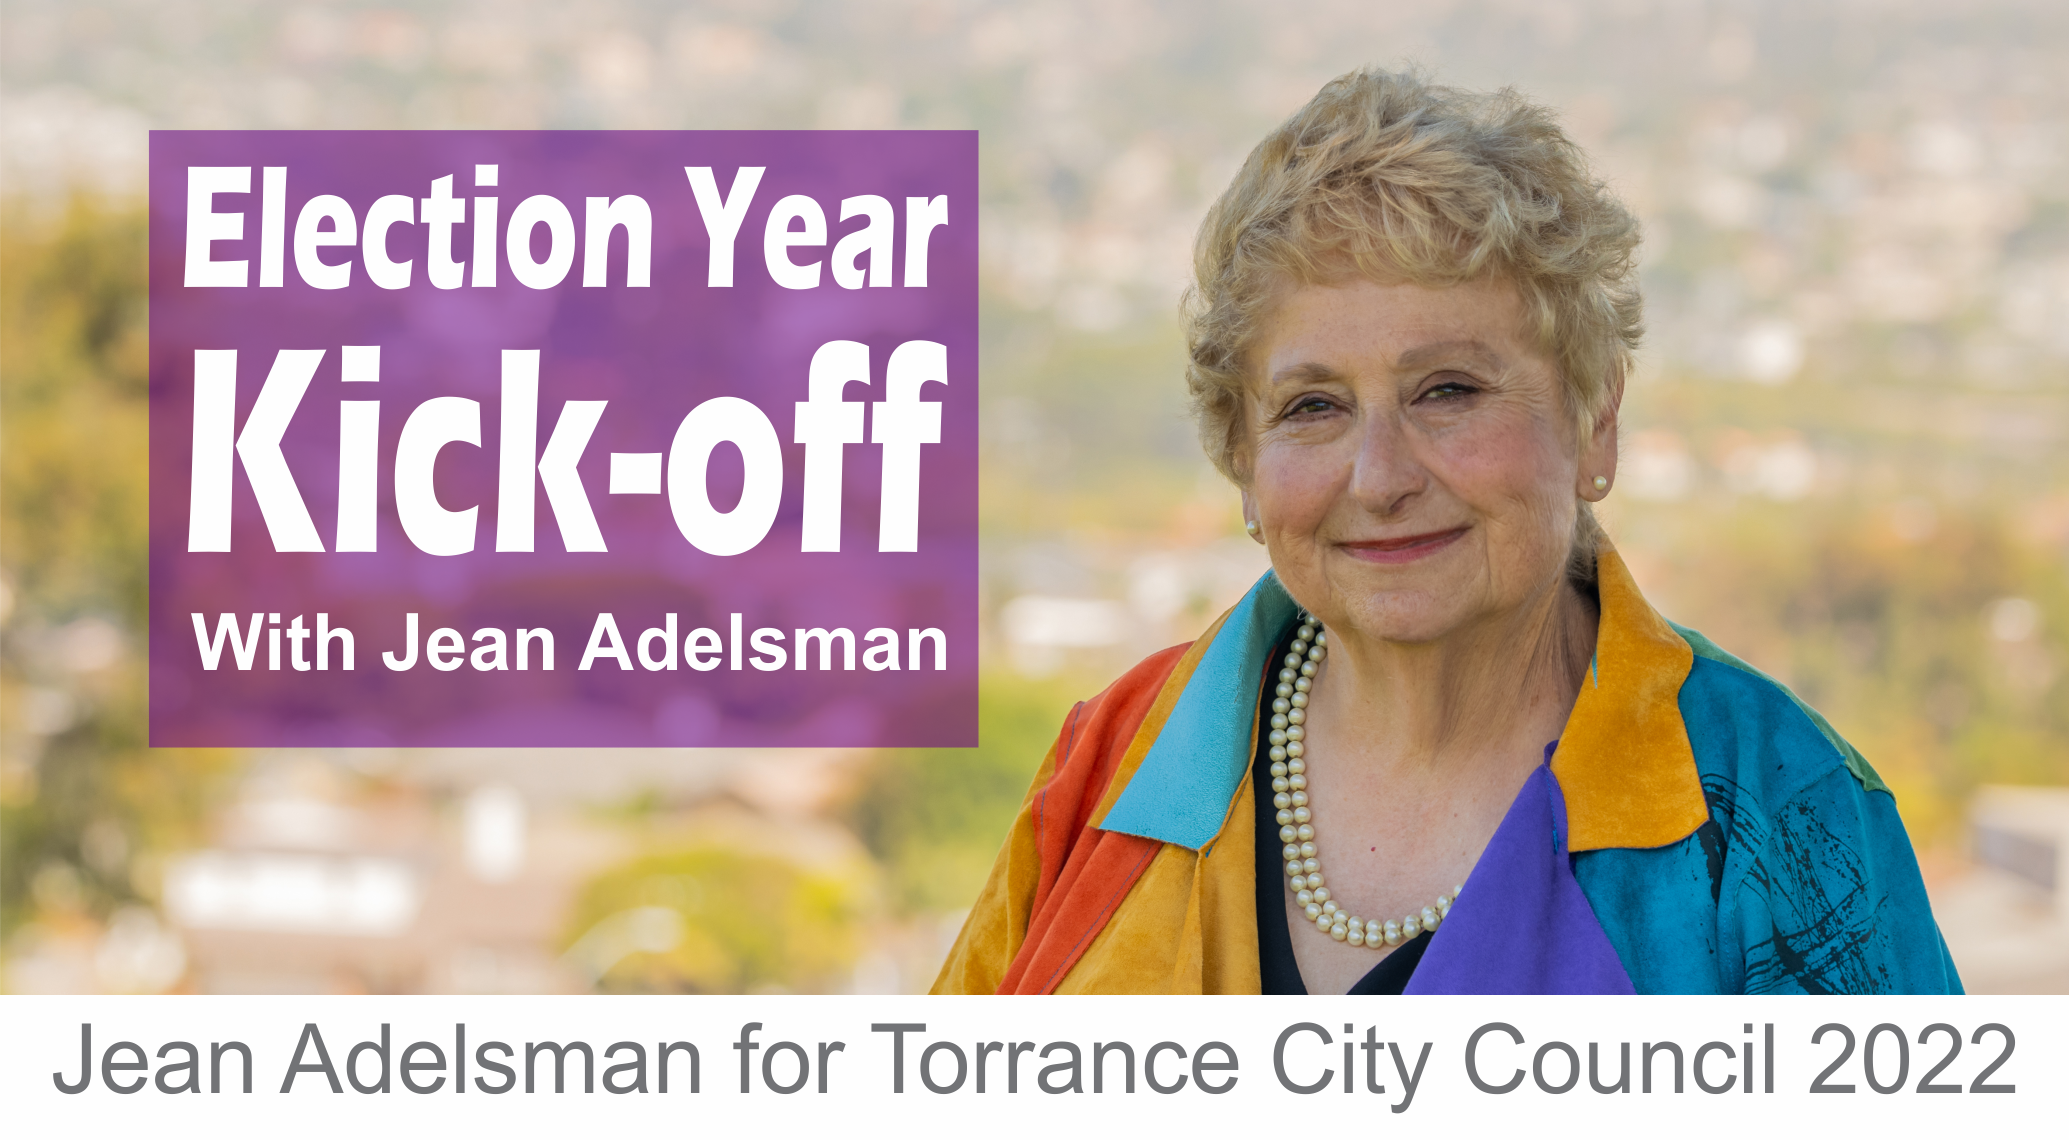 Jean Adelsman for Torrance City Council 2022